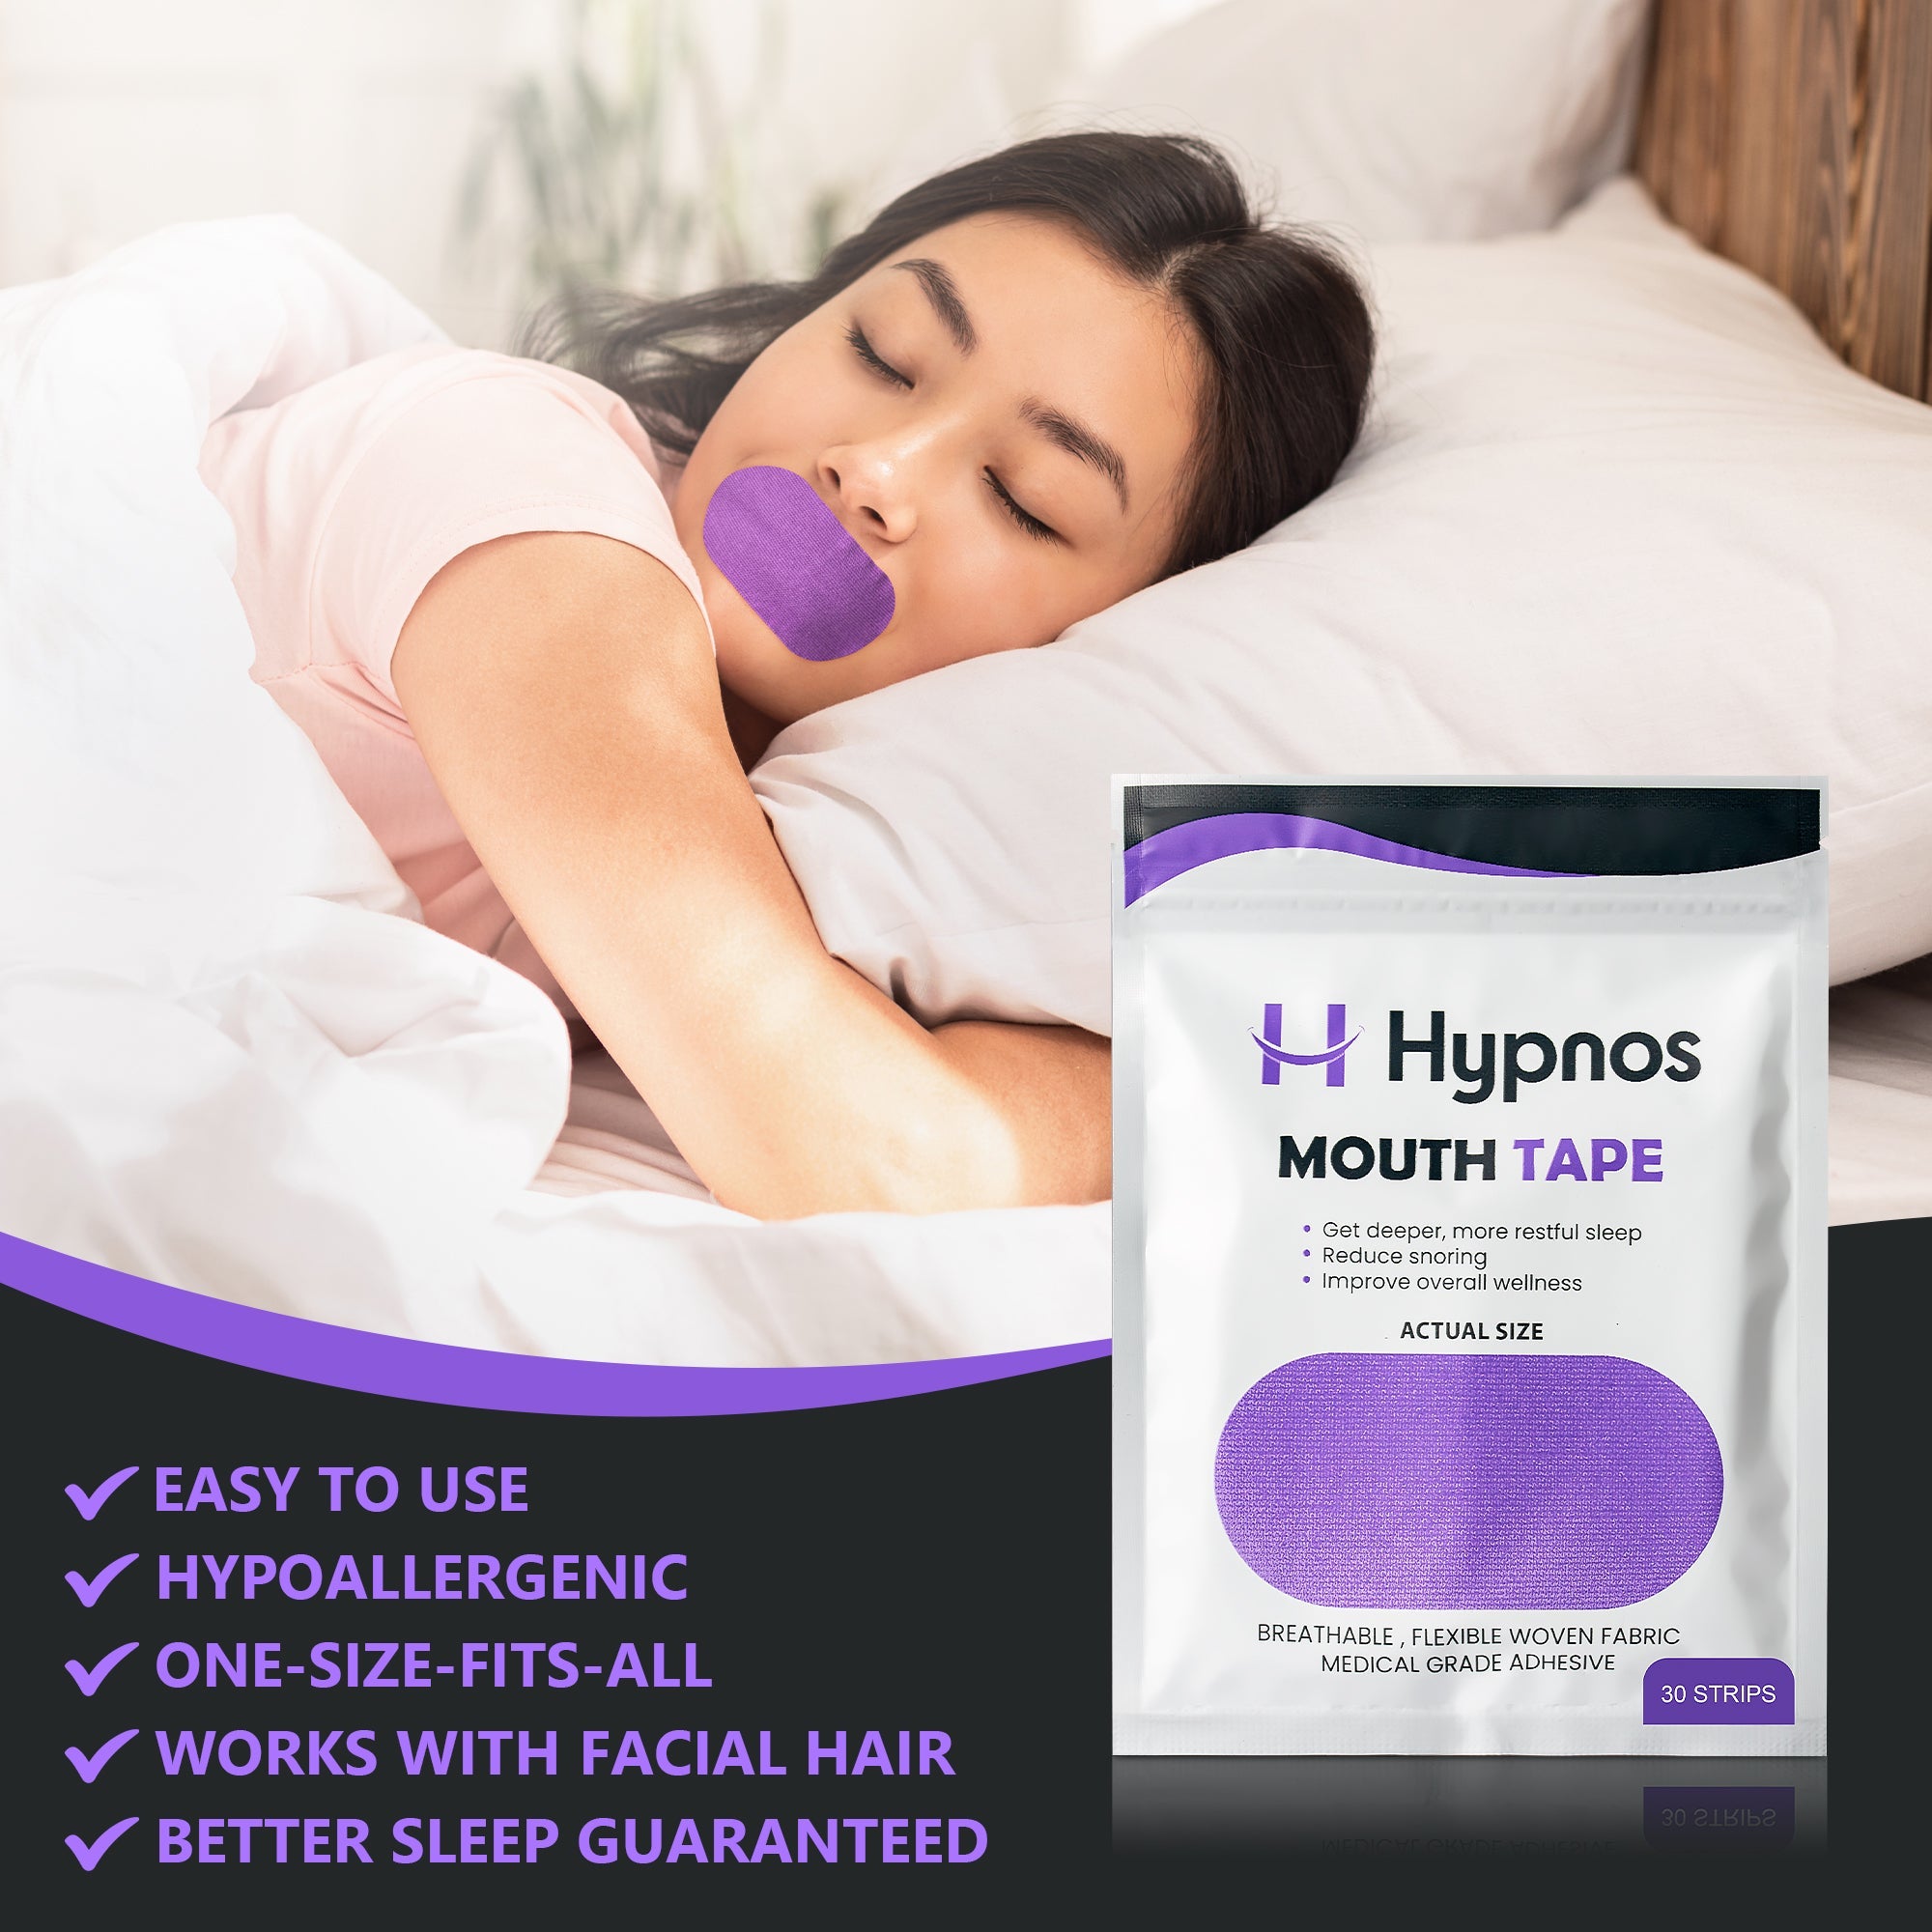 Hypnos Mouth Tape - 3rd Month FREE Special Offer